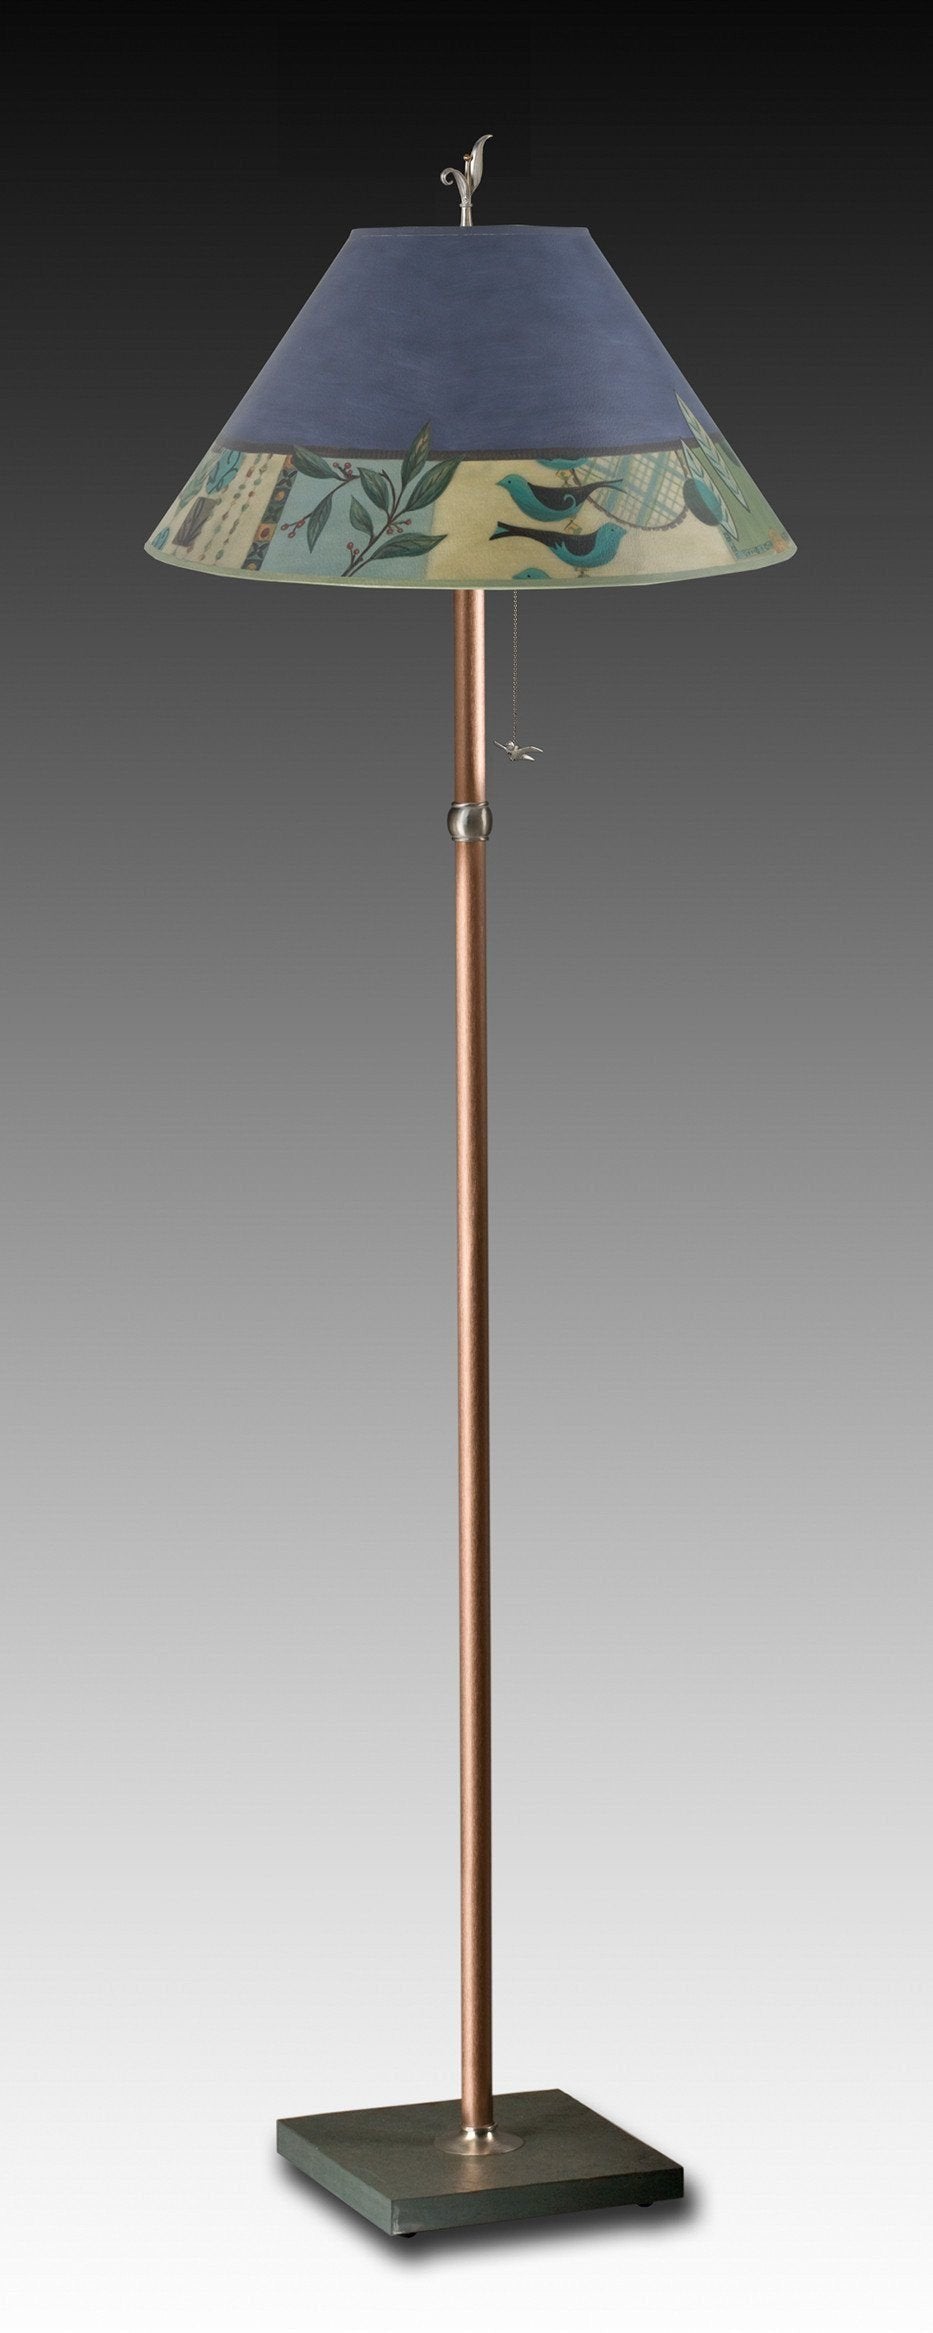 Copper Floor Lamp with Large Conical Shade in New Capri Periwinkle